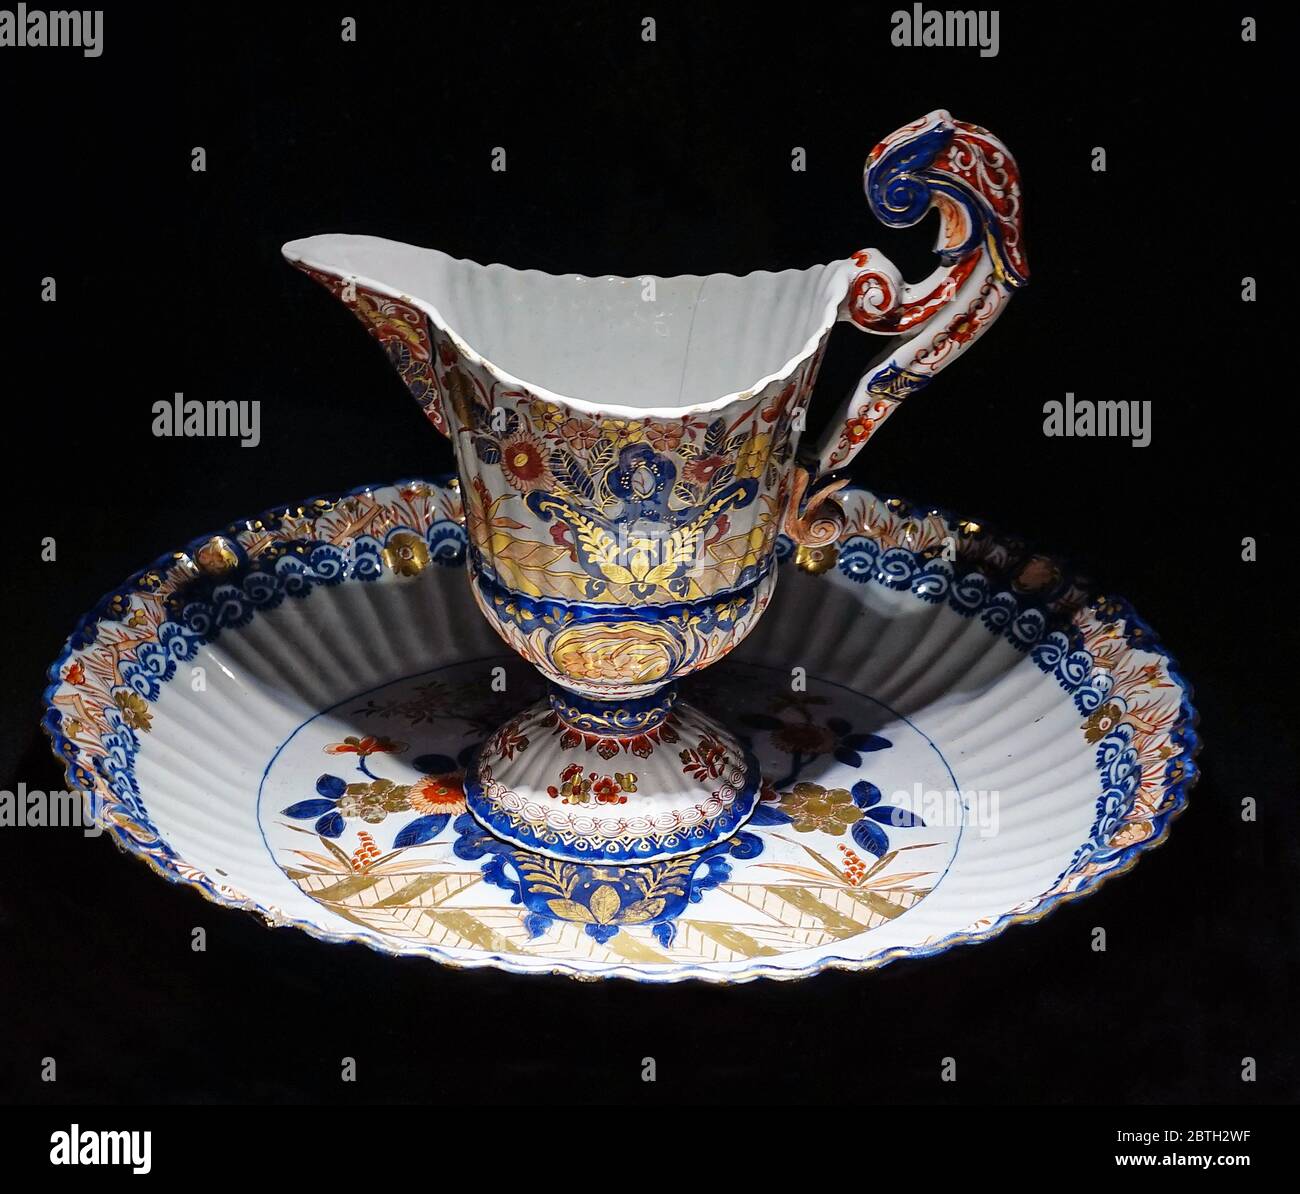 Ewer and basin set 1700-1720.Ewer and basin sets served the same purpose as wall fountains.The blue,red and gold decoration on this one is ispired by polychrome Imari porcelain from Japan. Stock Photo